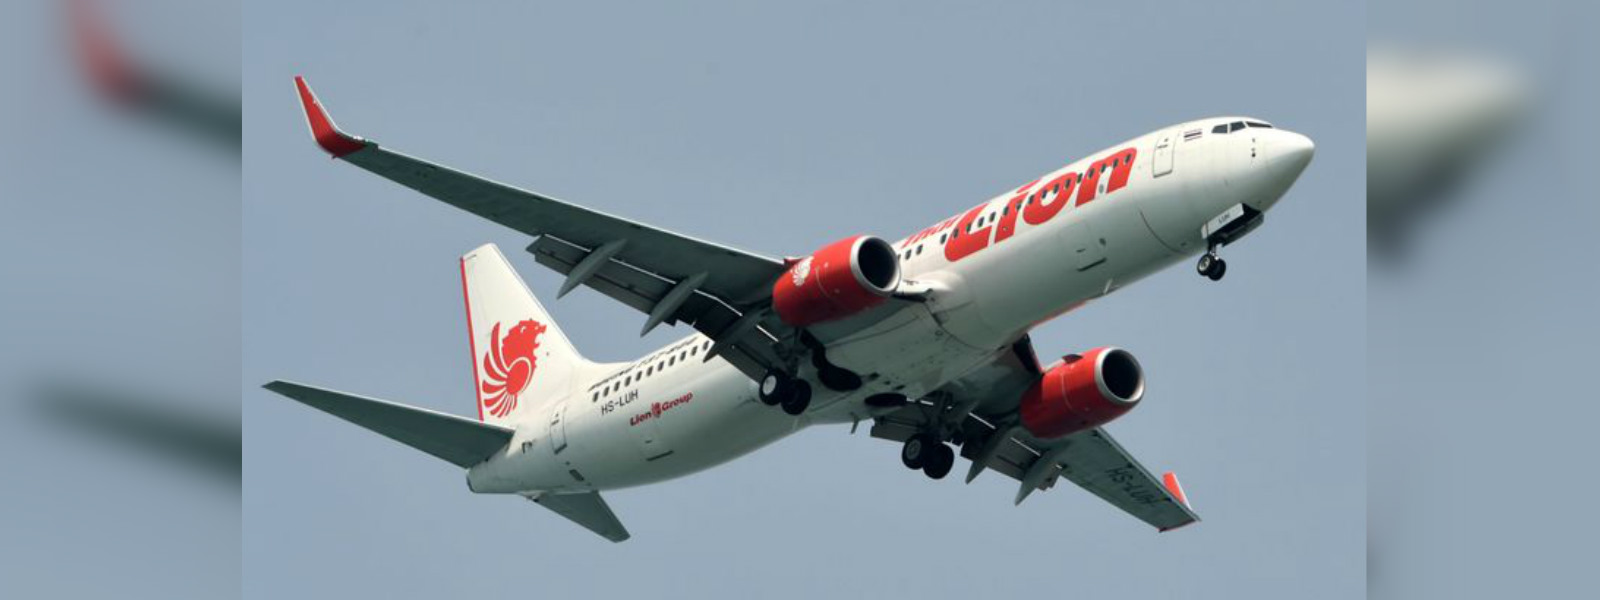 Lion Air passenger diagnosed with Influenza